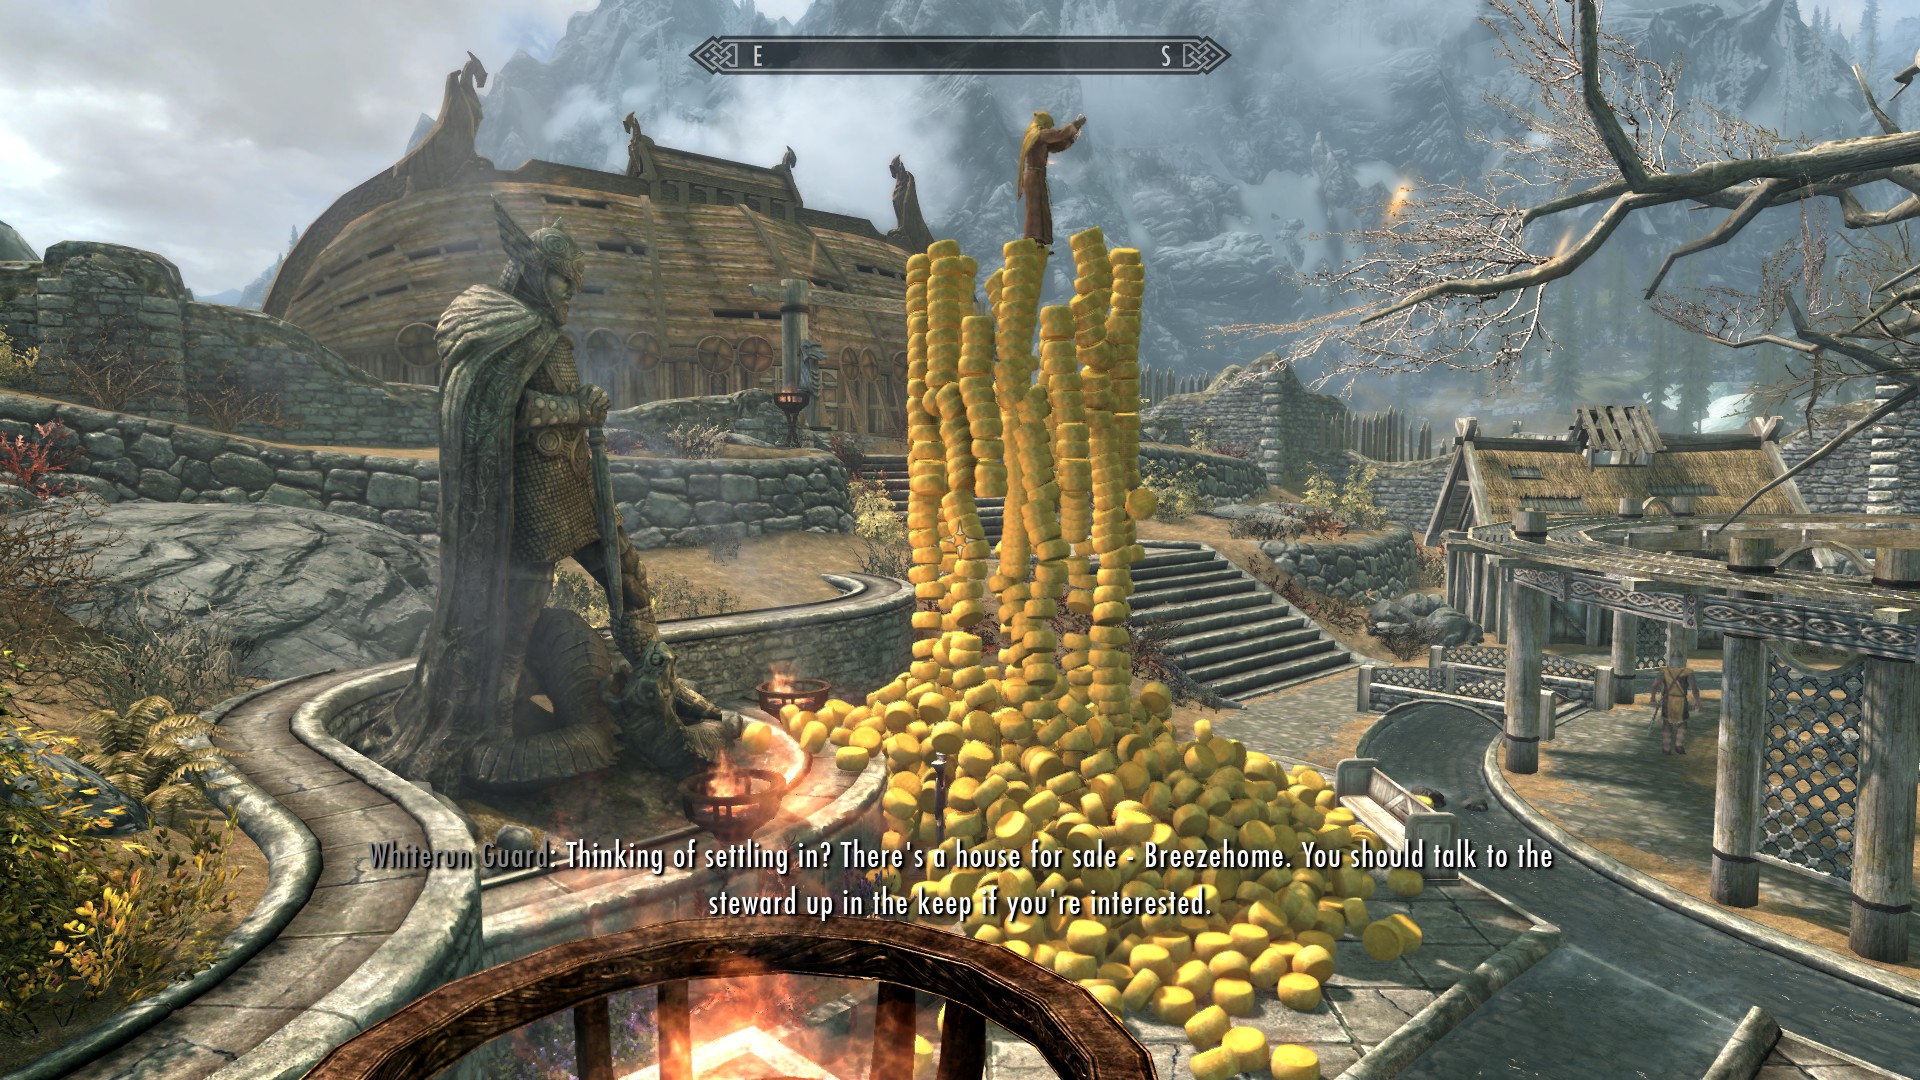 skyrim cheese gif - La Whiteruntun Thinking of settling in? There's house for sale breezehome. You should talk to the steward up in the keep if you re interested.